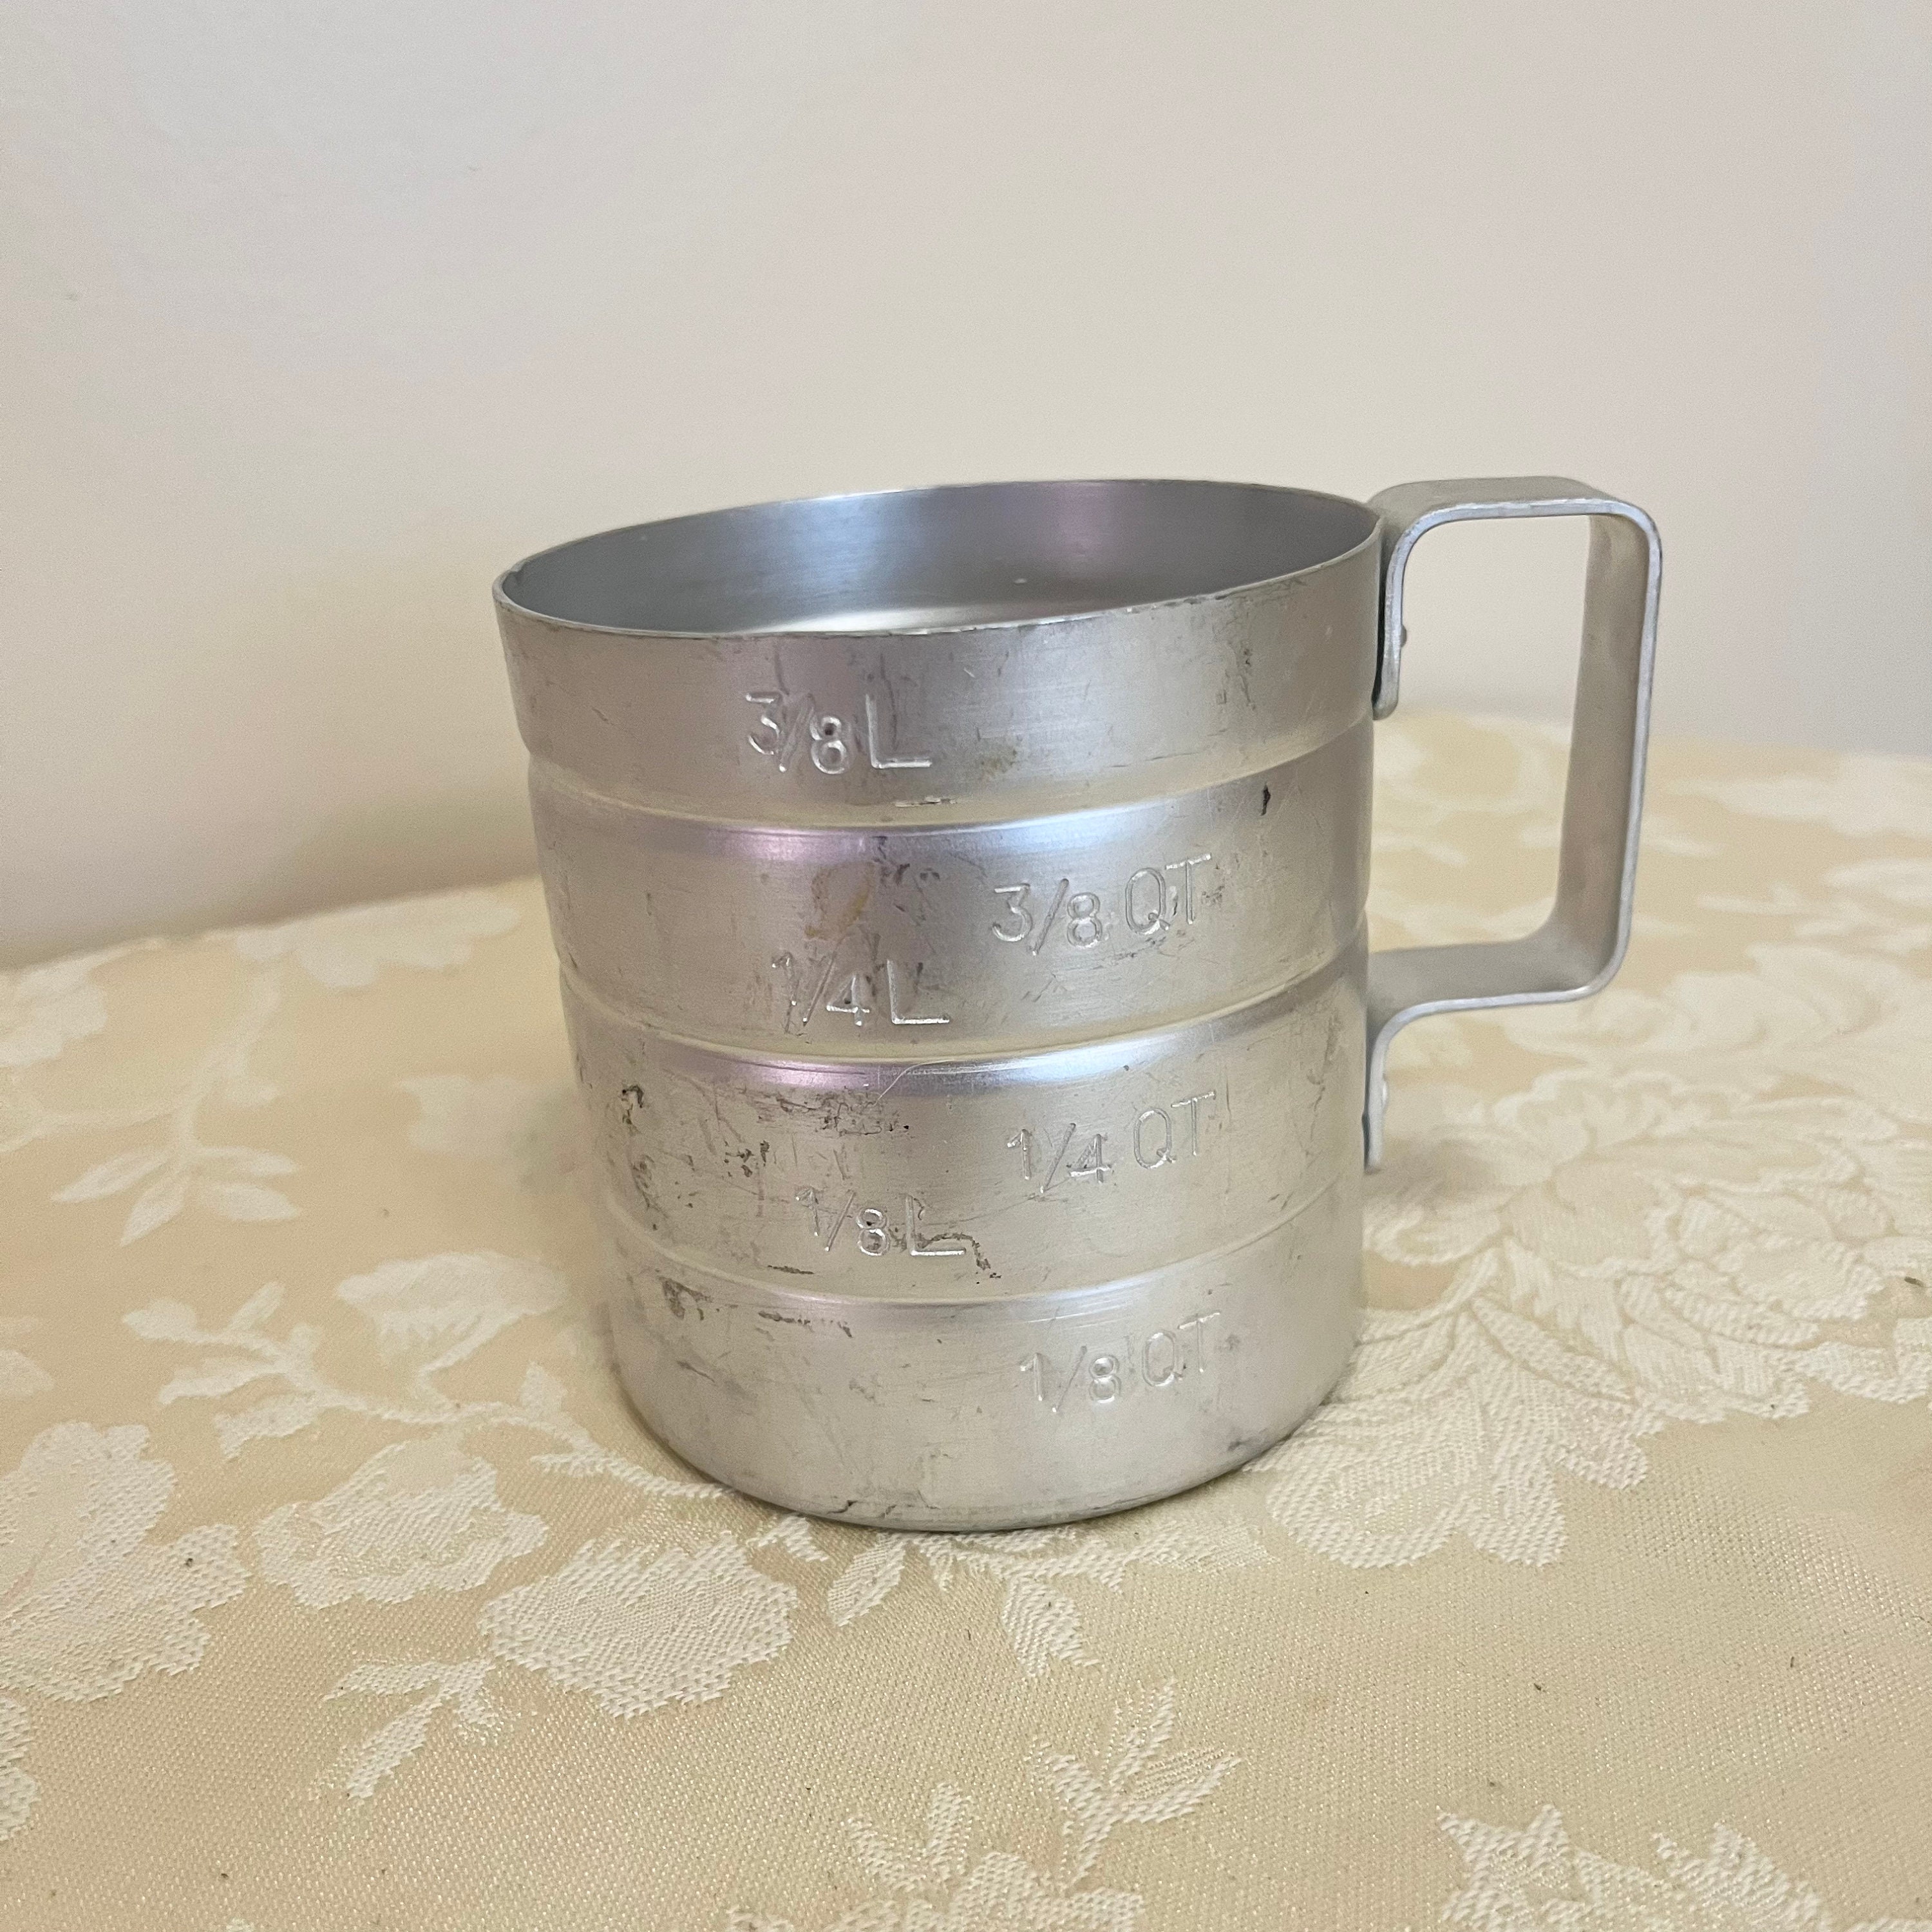 Vintage Embossed Metal 1 quart Measuring Cup For Household Use Only